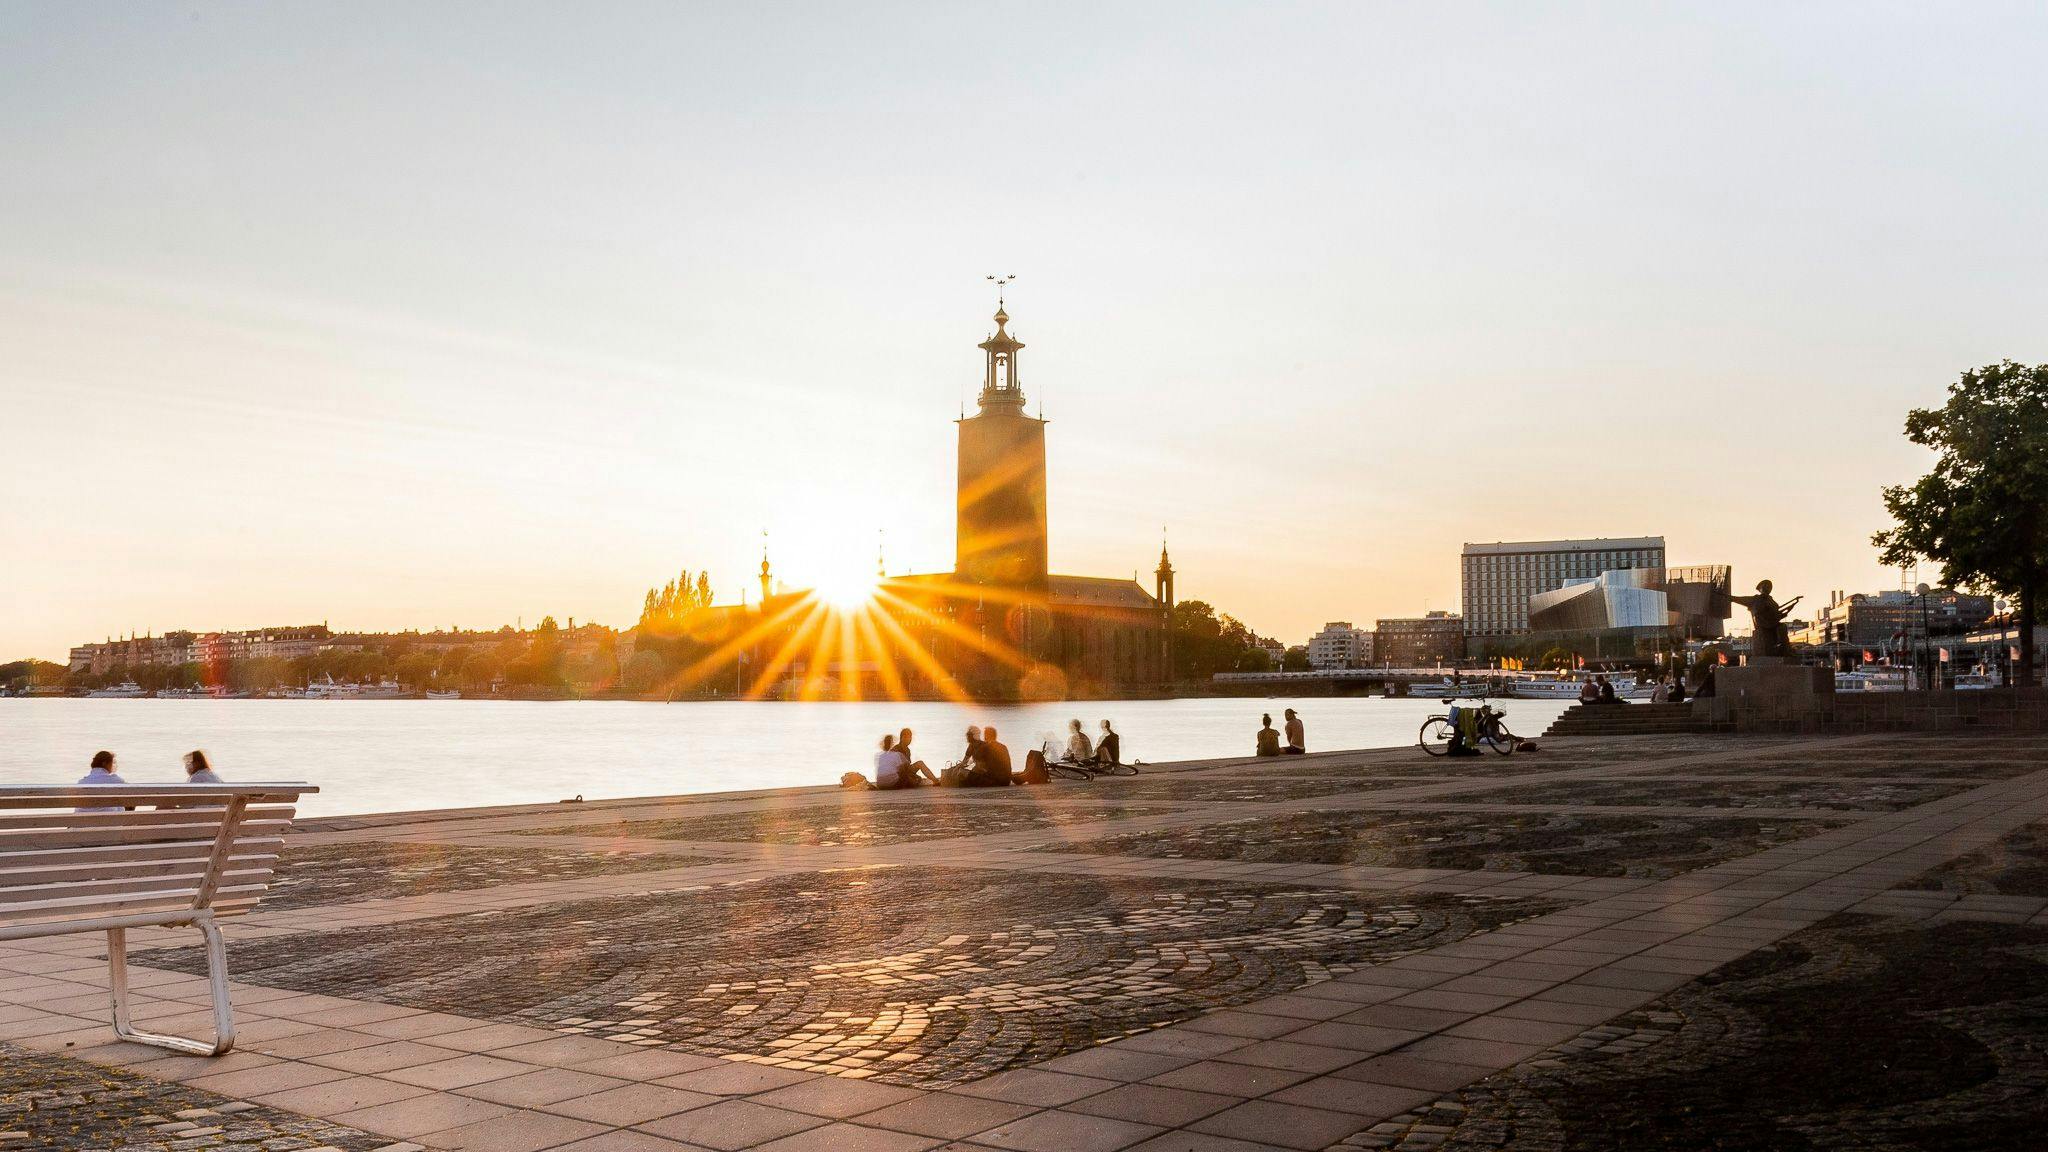 A photograph  of downtown, city, building and person in Stockholm. Photograph by Thorben Mielke via Unsplash https://unsplash.com/photos/juf9opFKn2k